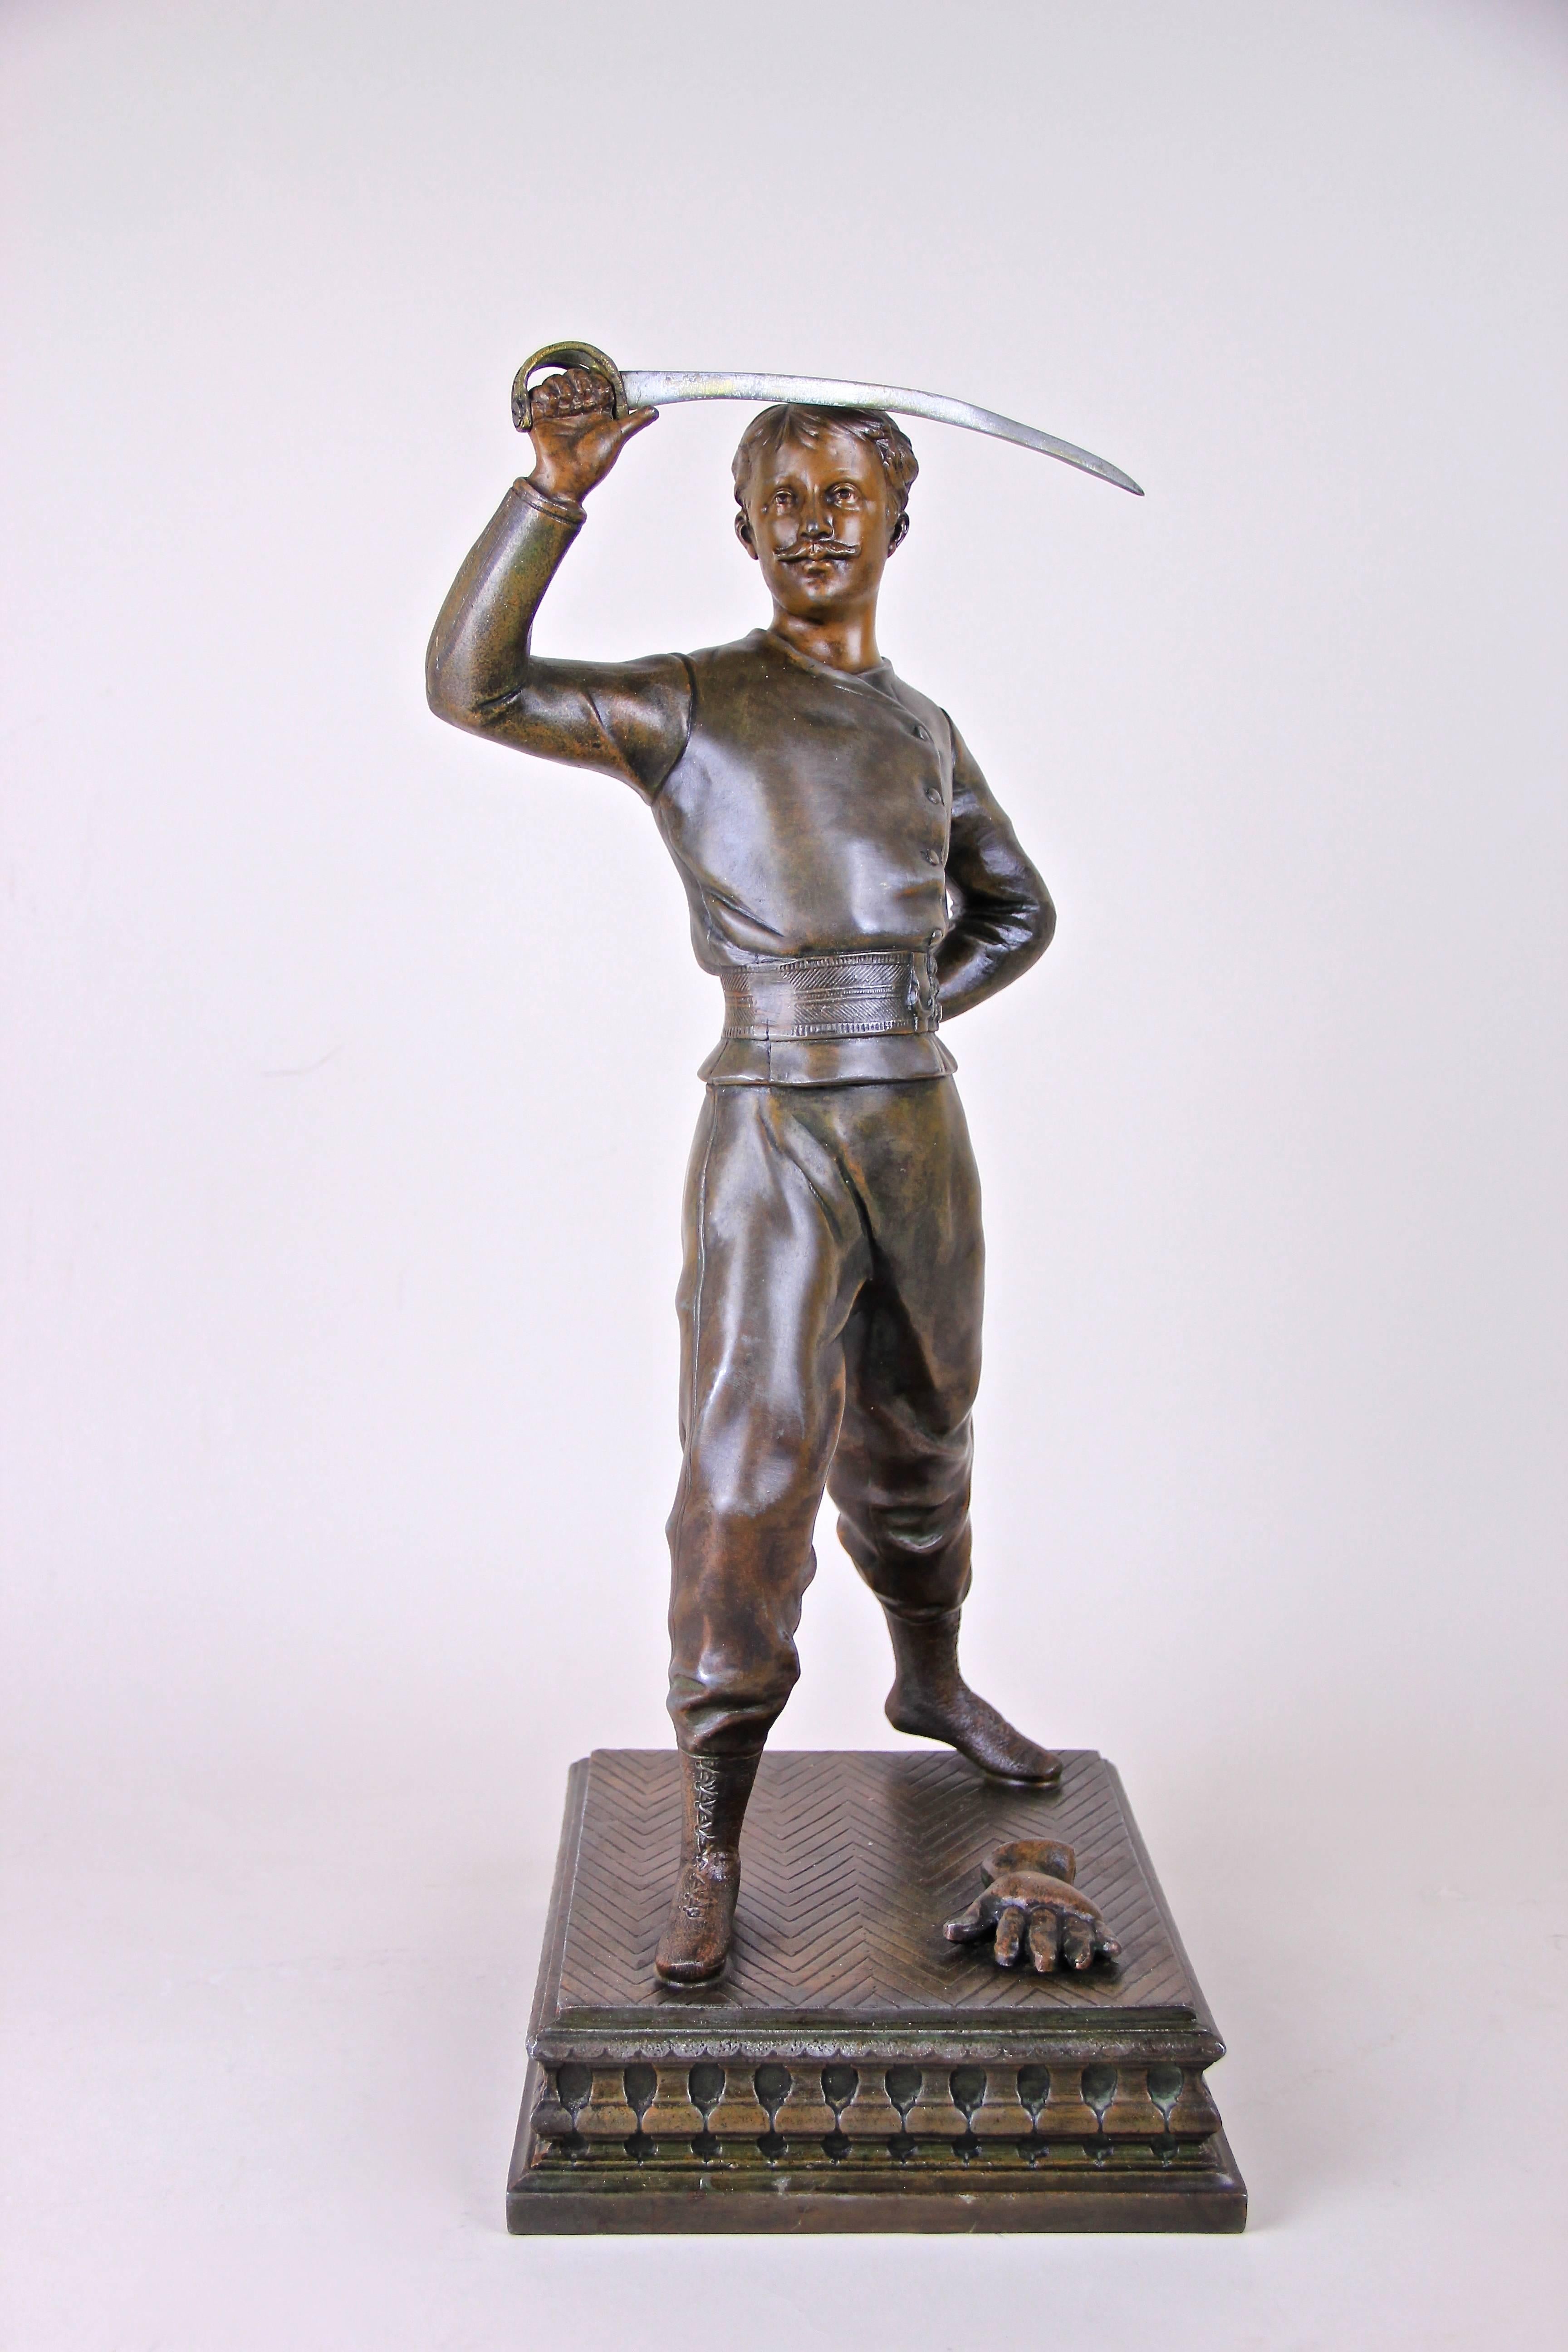 Superb Art Nouveau sculpture from France, circa 1900 showing a swordsman holding up his saber. Made in a very detailed manner this great tin cast sculpture shows an unknown lateral signature on the base. A very decorative and imposing depiction of a